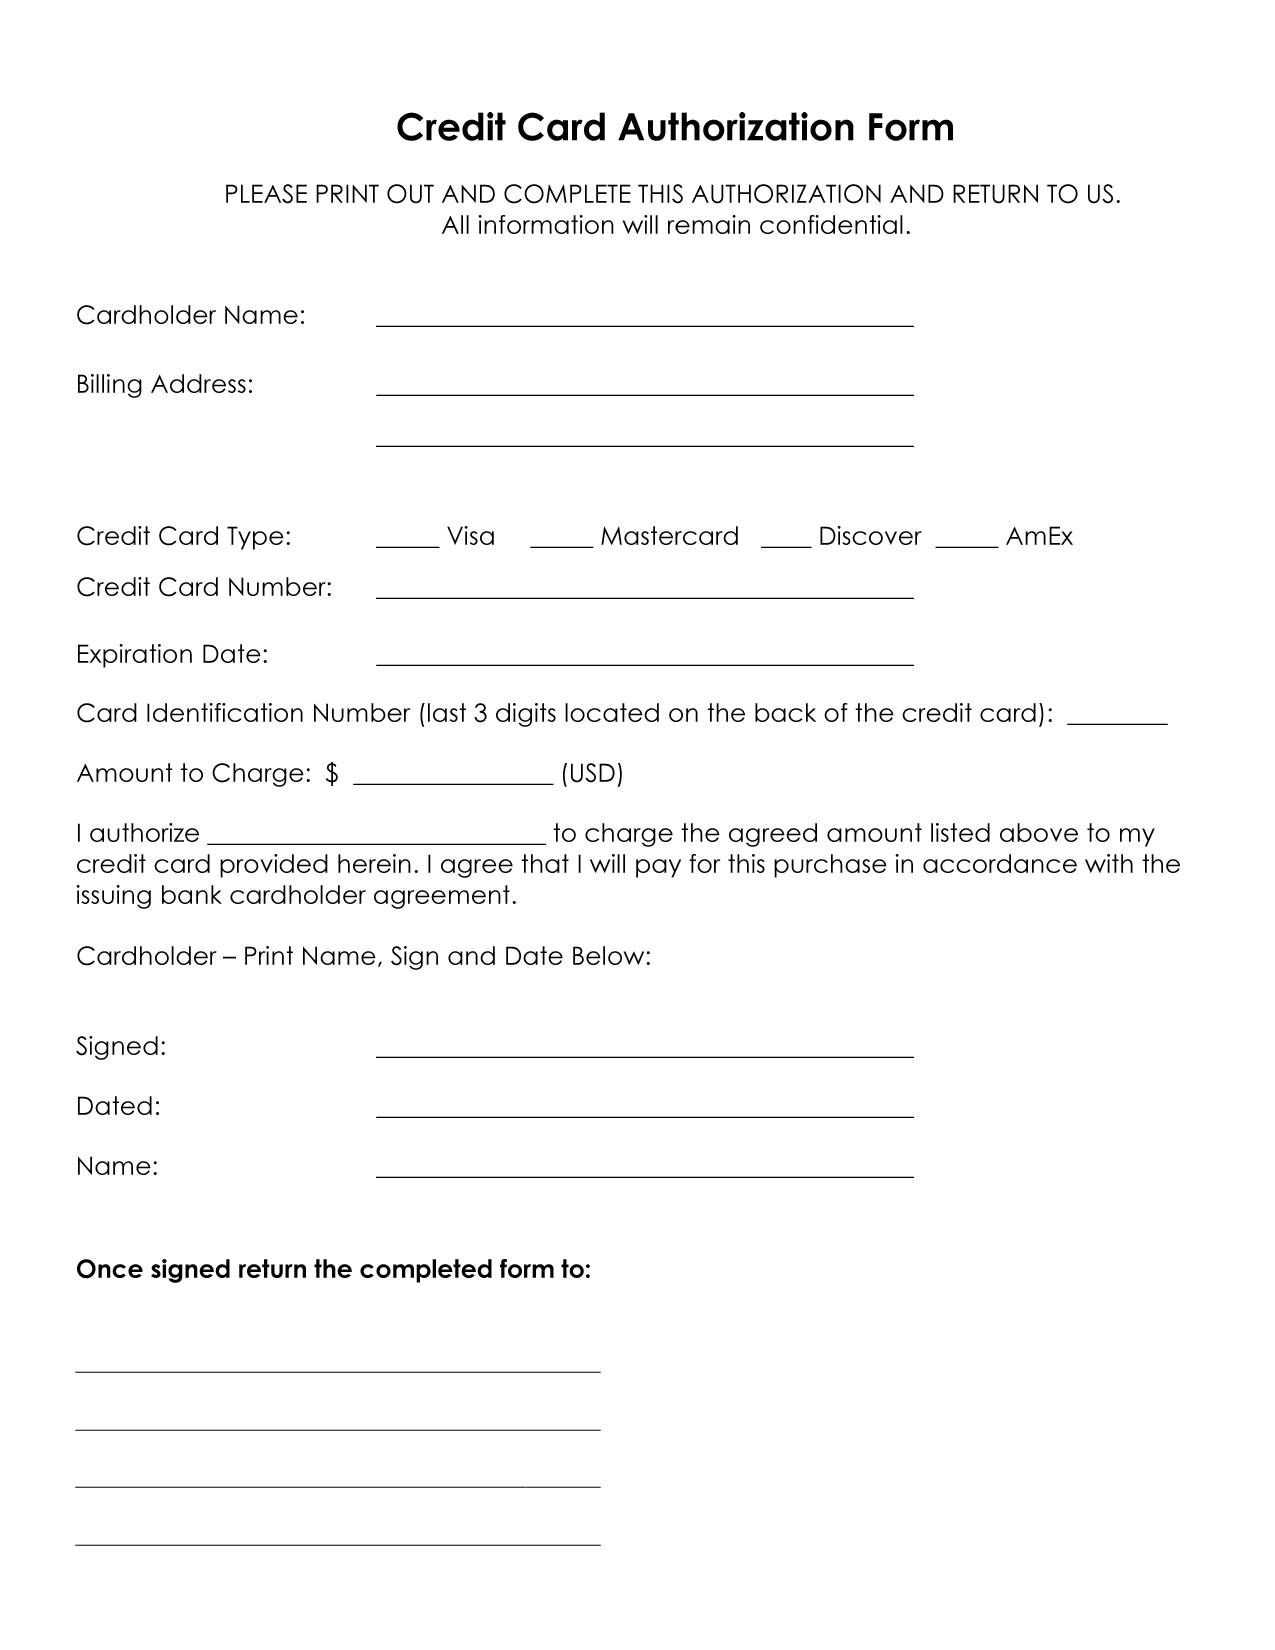 Credit Card Authorization Form Template | Credit Card Regarding Hotel Credit Card Authorization Form Template